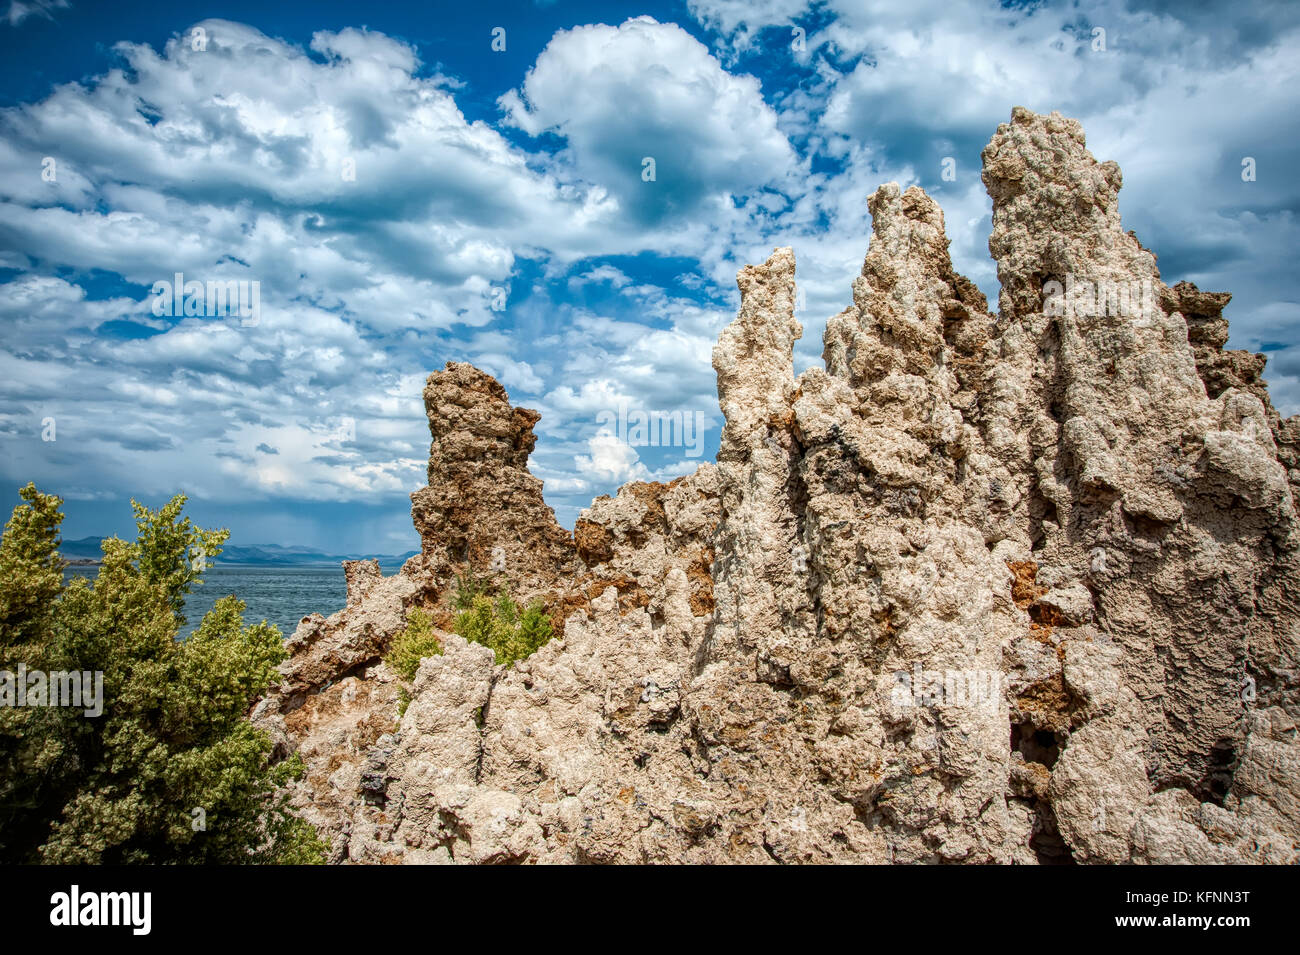 Mono Lake in Northern California located in the Great Basin of the Sierra Mountain Range. Stock Photo